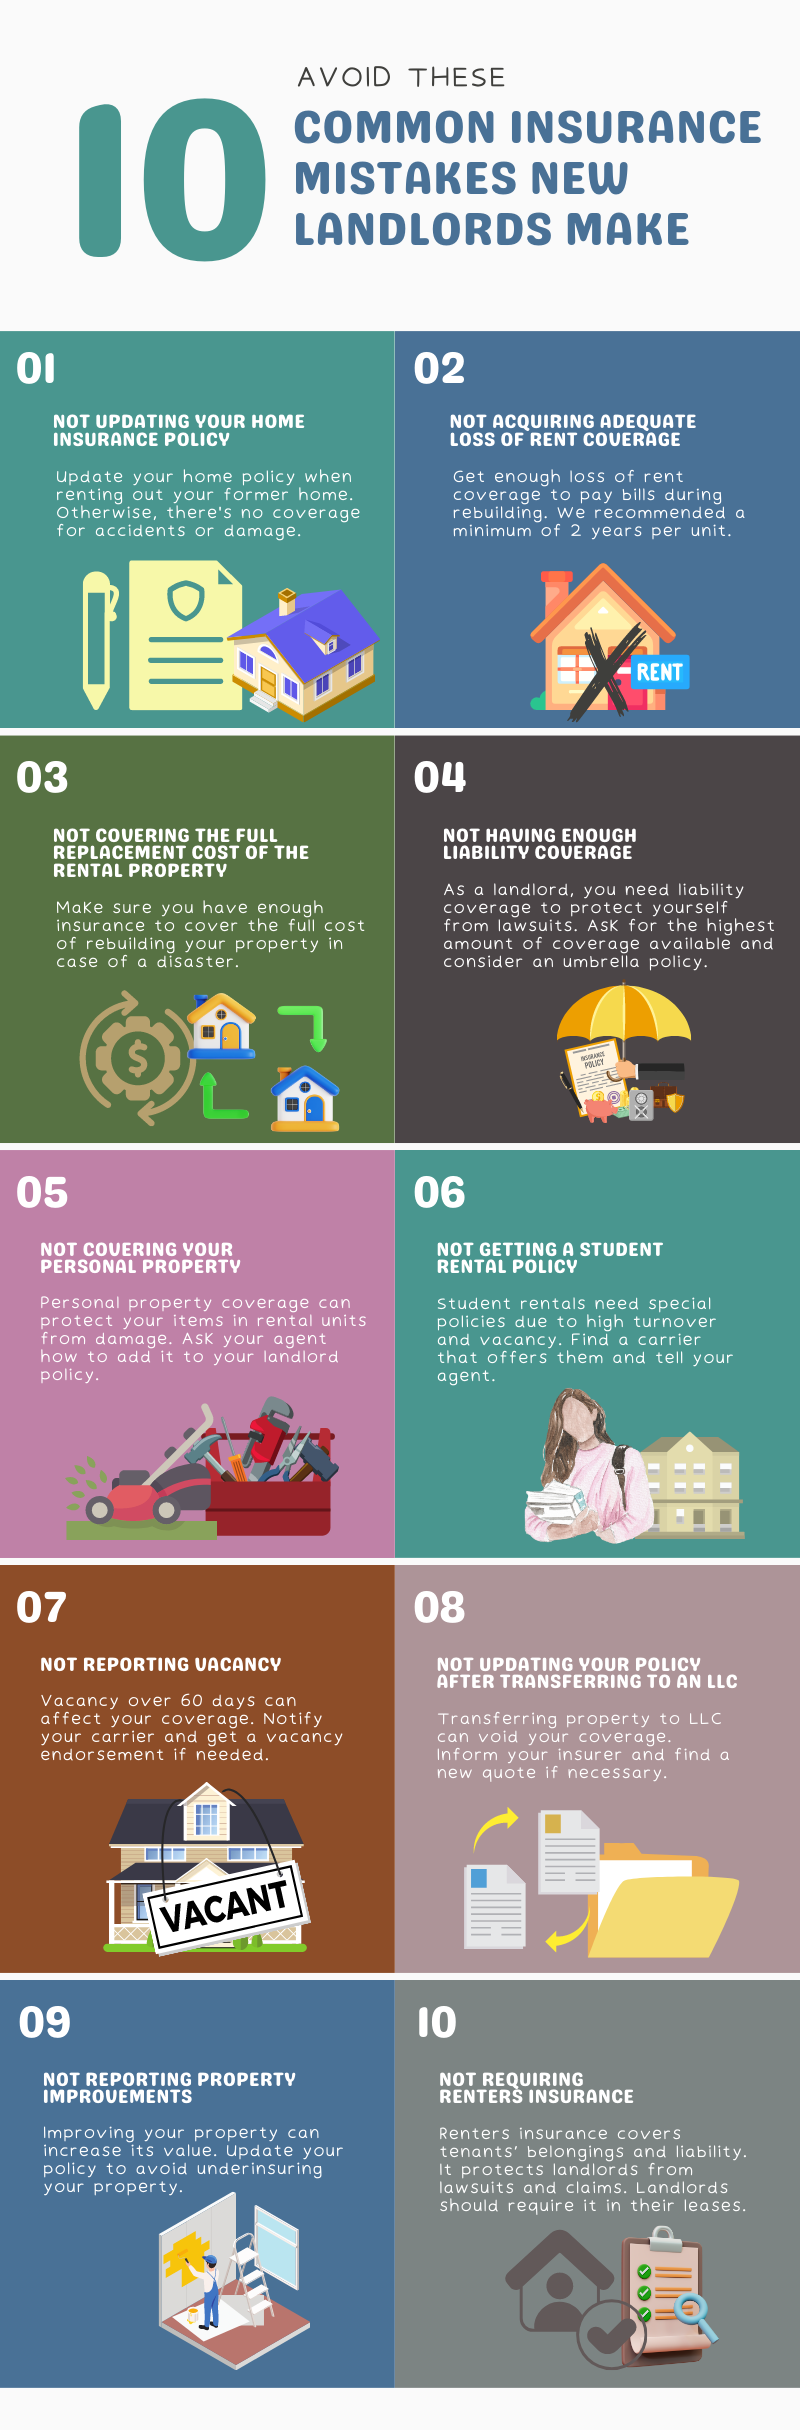 Infographic-1_10-Common-Mistakes-New-Landlords-Make-When-Purchasing-Insurance (1)